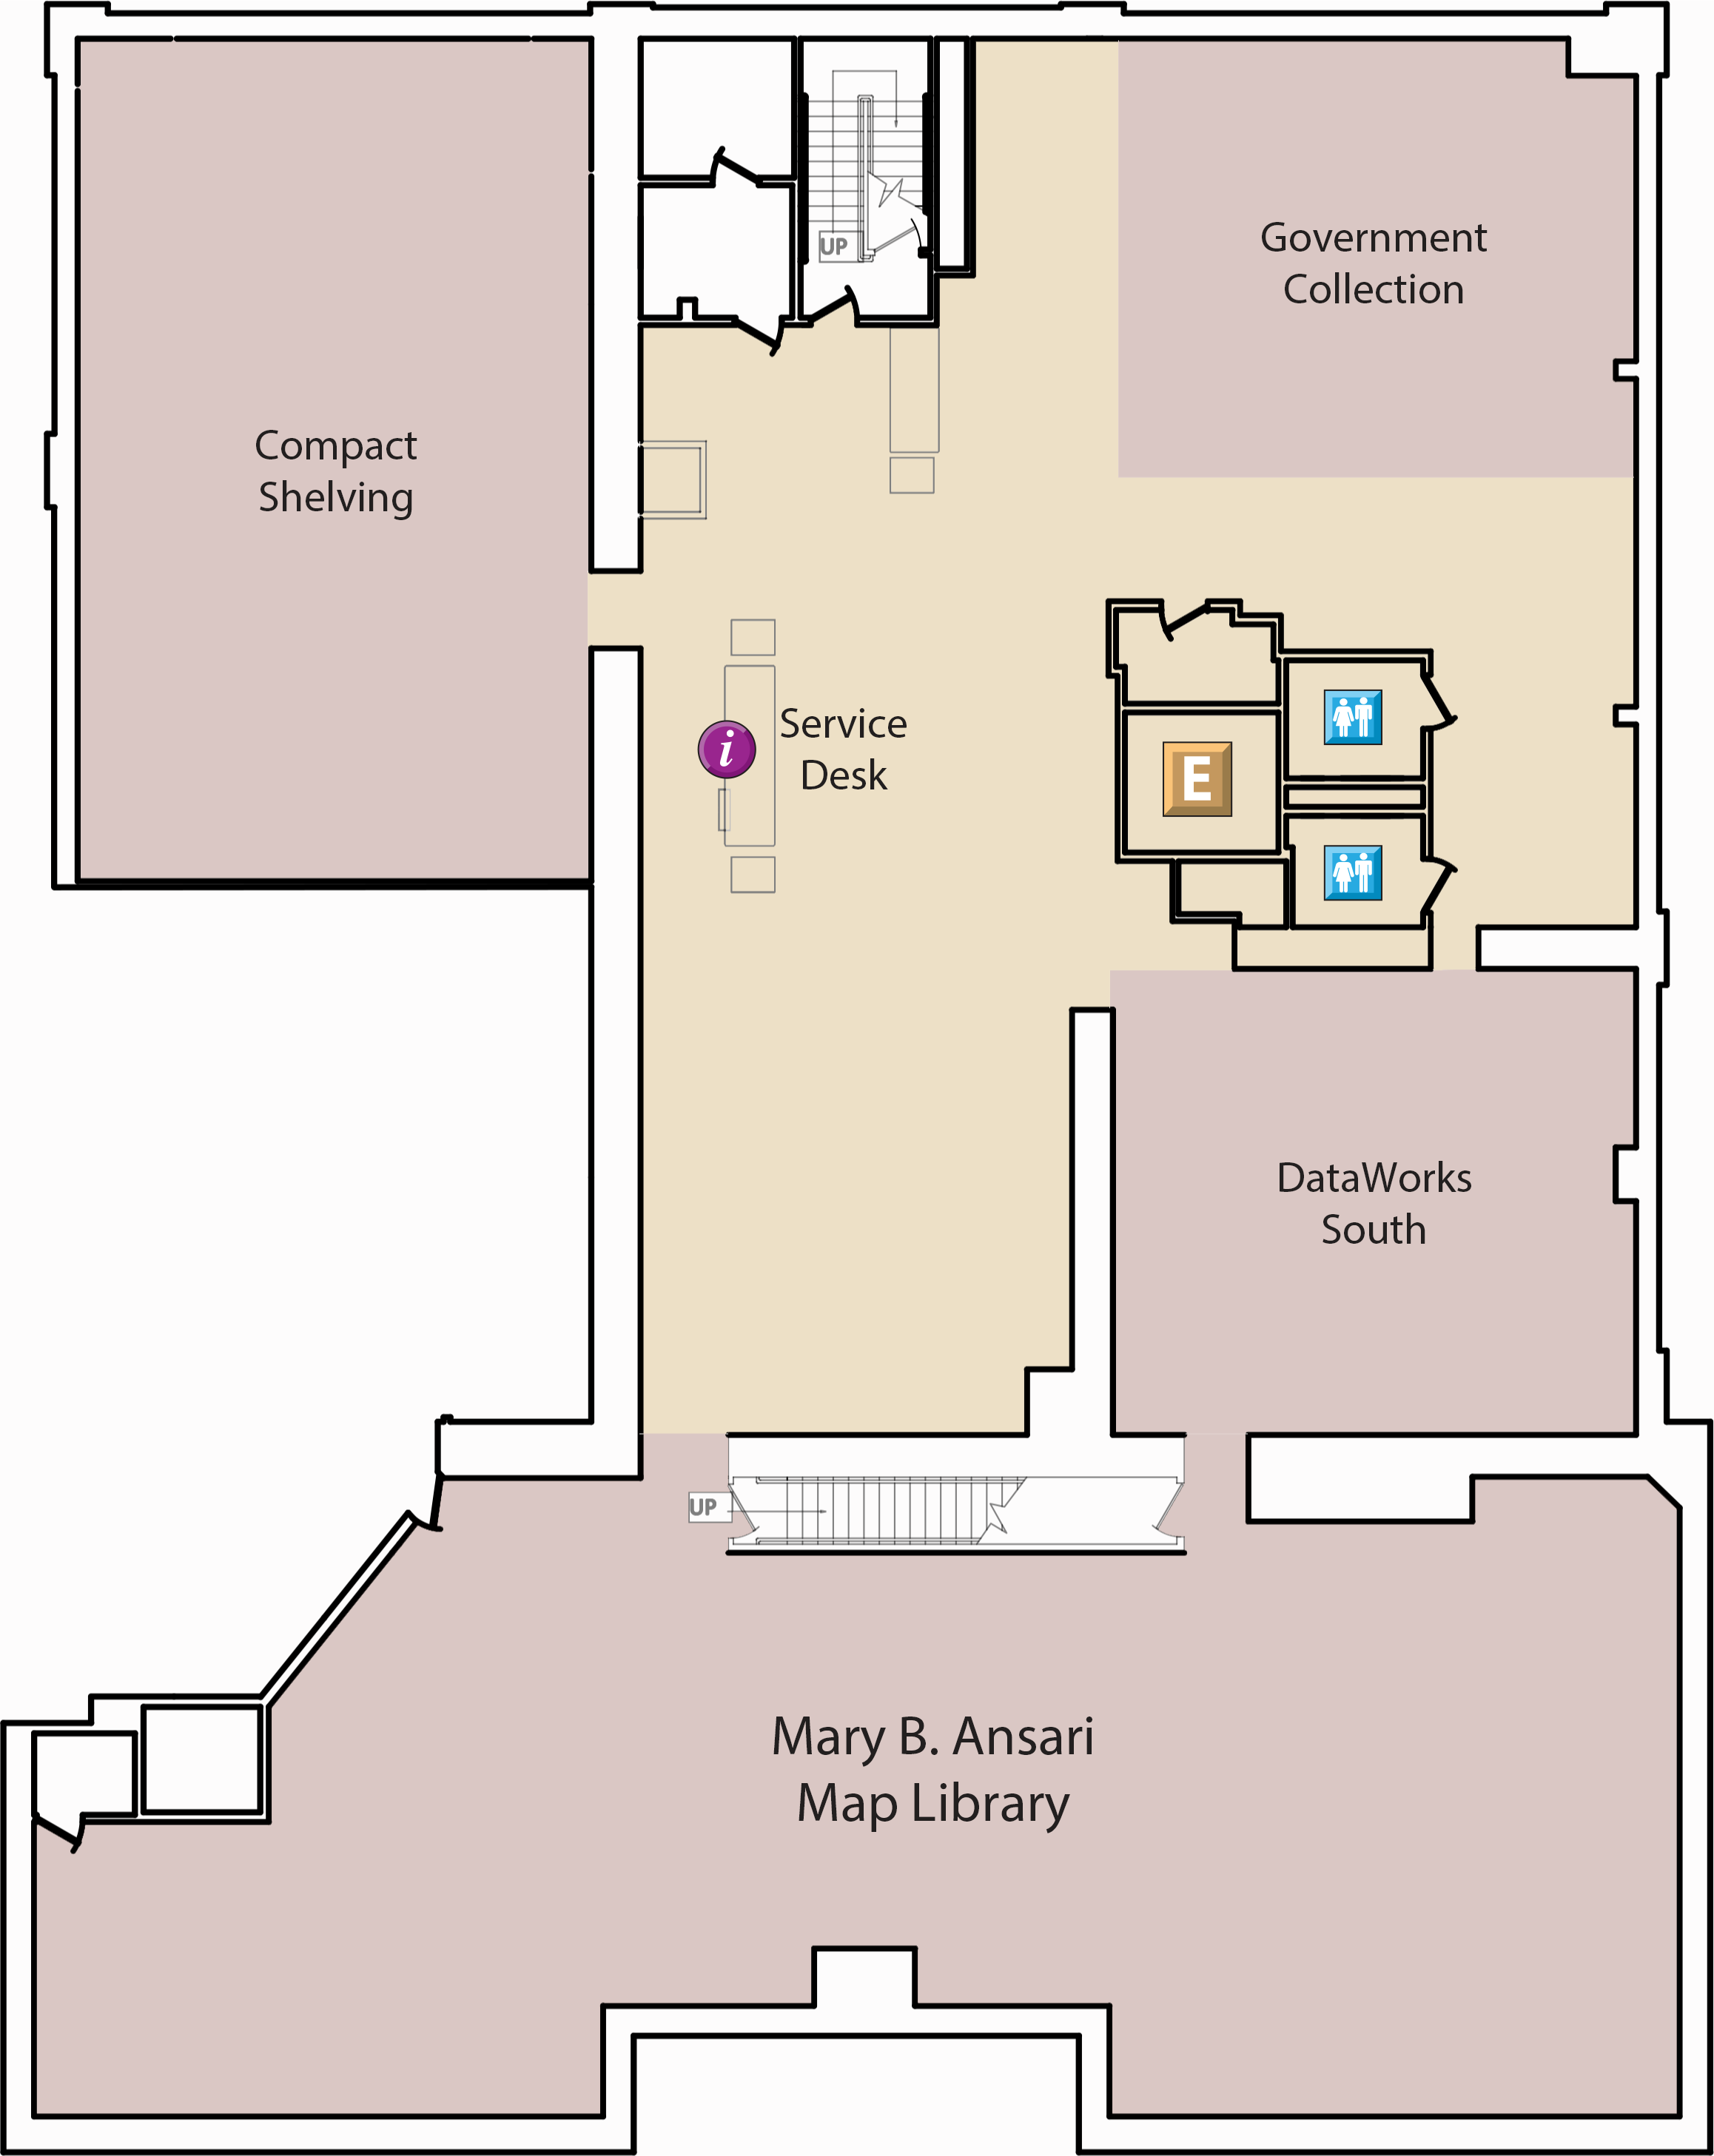 The Basement Floor map is a map of the DeLaMare library at the University of Nevada, Reno main campus showing all of the rooms and features of the Basement Floor of the DeLaMare Library.  Getting to the Basement Floor of the DeLaMare Library The basement floor of the DeLaMare Library includes an entrance facing north. There is an elevator in the middle of the basement-floor area and a set of stairs on the north end that leads to the upper floors of the DeLaMare Library.  Features of the Basement Floor The Service Desk is directly south of the north staircase entrance to the basement floor.  On the west side of the basement floor is the Compact Shelving room.  The Government Collection is on the east side of the basement floor.  South of the Government collection, there are two gender-neutral bathrooms. Directly to the west of the bathrooms is a public elevator.  The DataWorks South lab is located south of the public elevator and the two gender-neutral bathrooms.  South of the basement floor, there is an exit only staircase that leads p to the first floor before entering the Mary B. Ansari Map Library.  On the very south end of the basement floor, you will find the Mary B. Ansari Map Library.